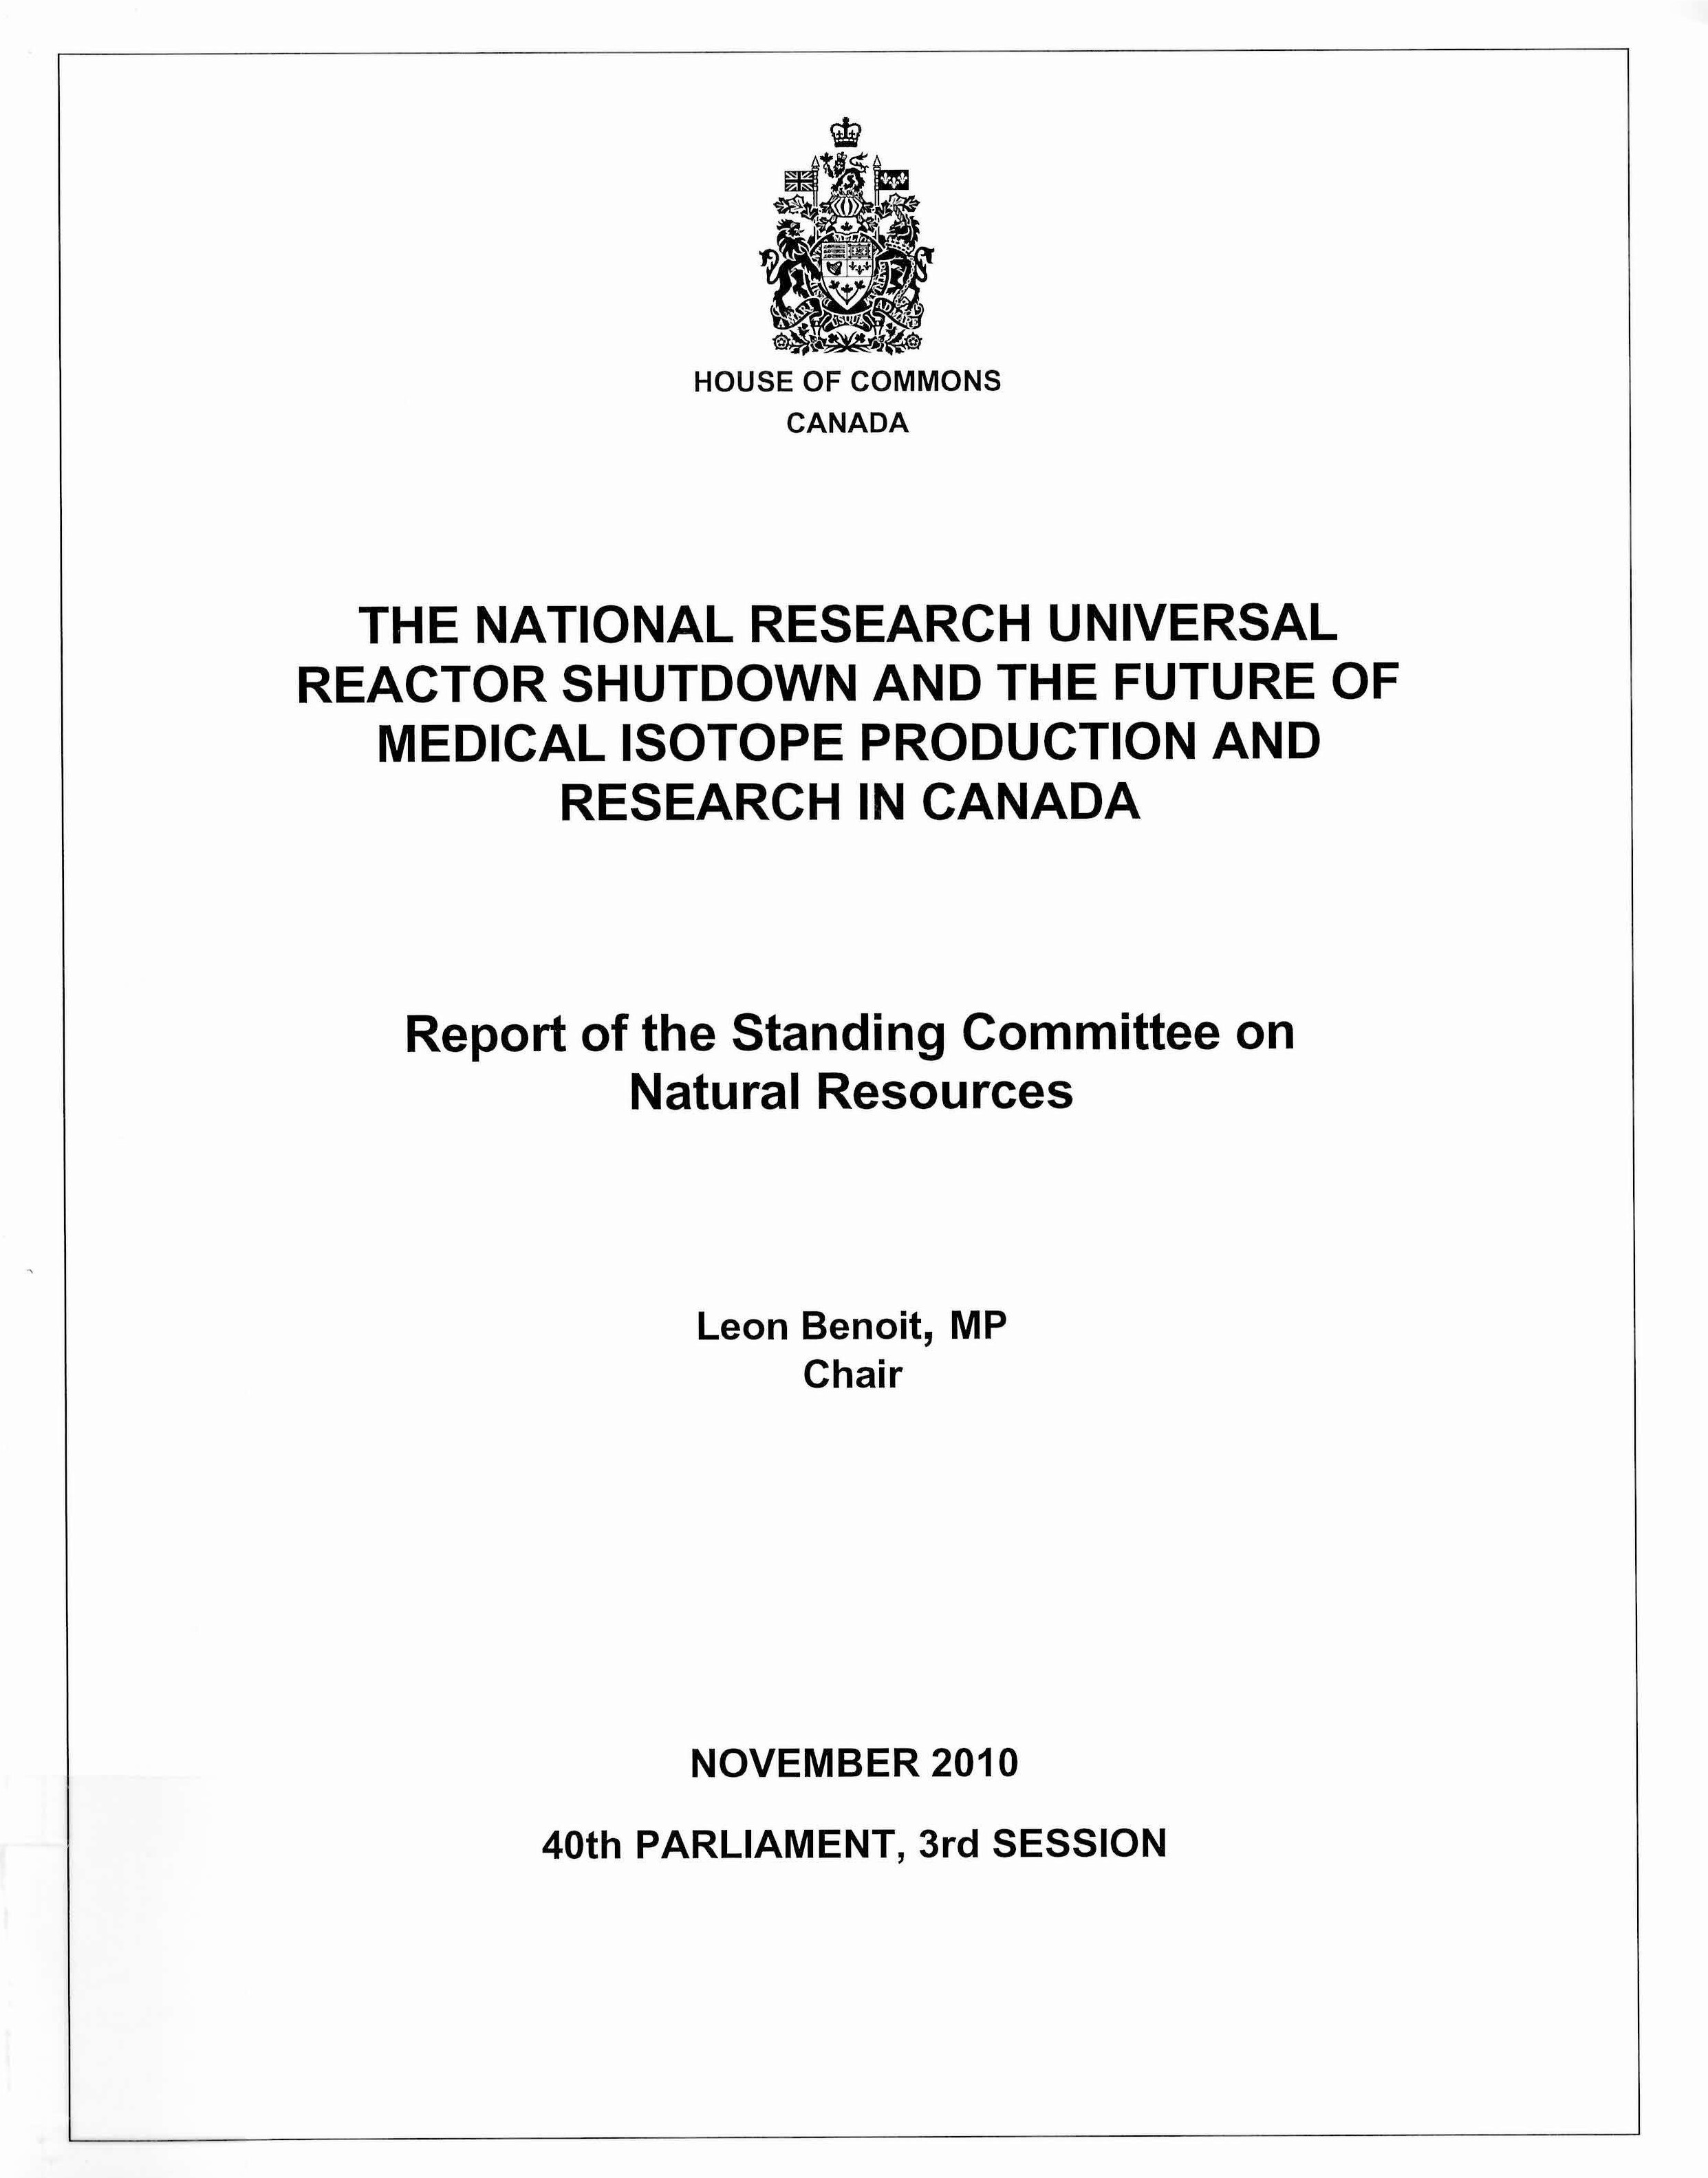 The National Research Universal reactor shutdown and the future of medical isotope production and research in Canada : report of the Standing Committee on Natural Resources